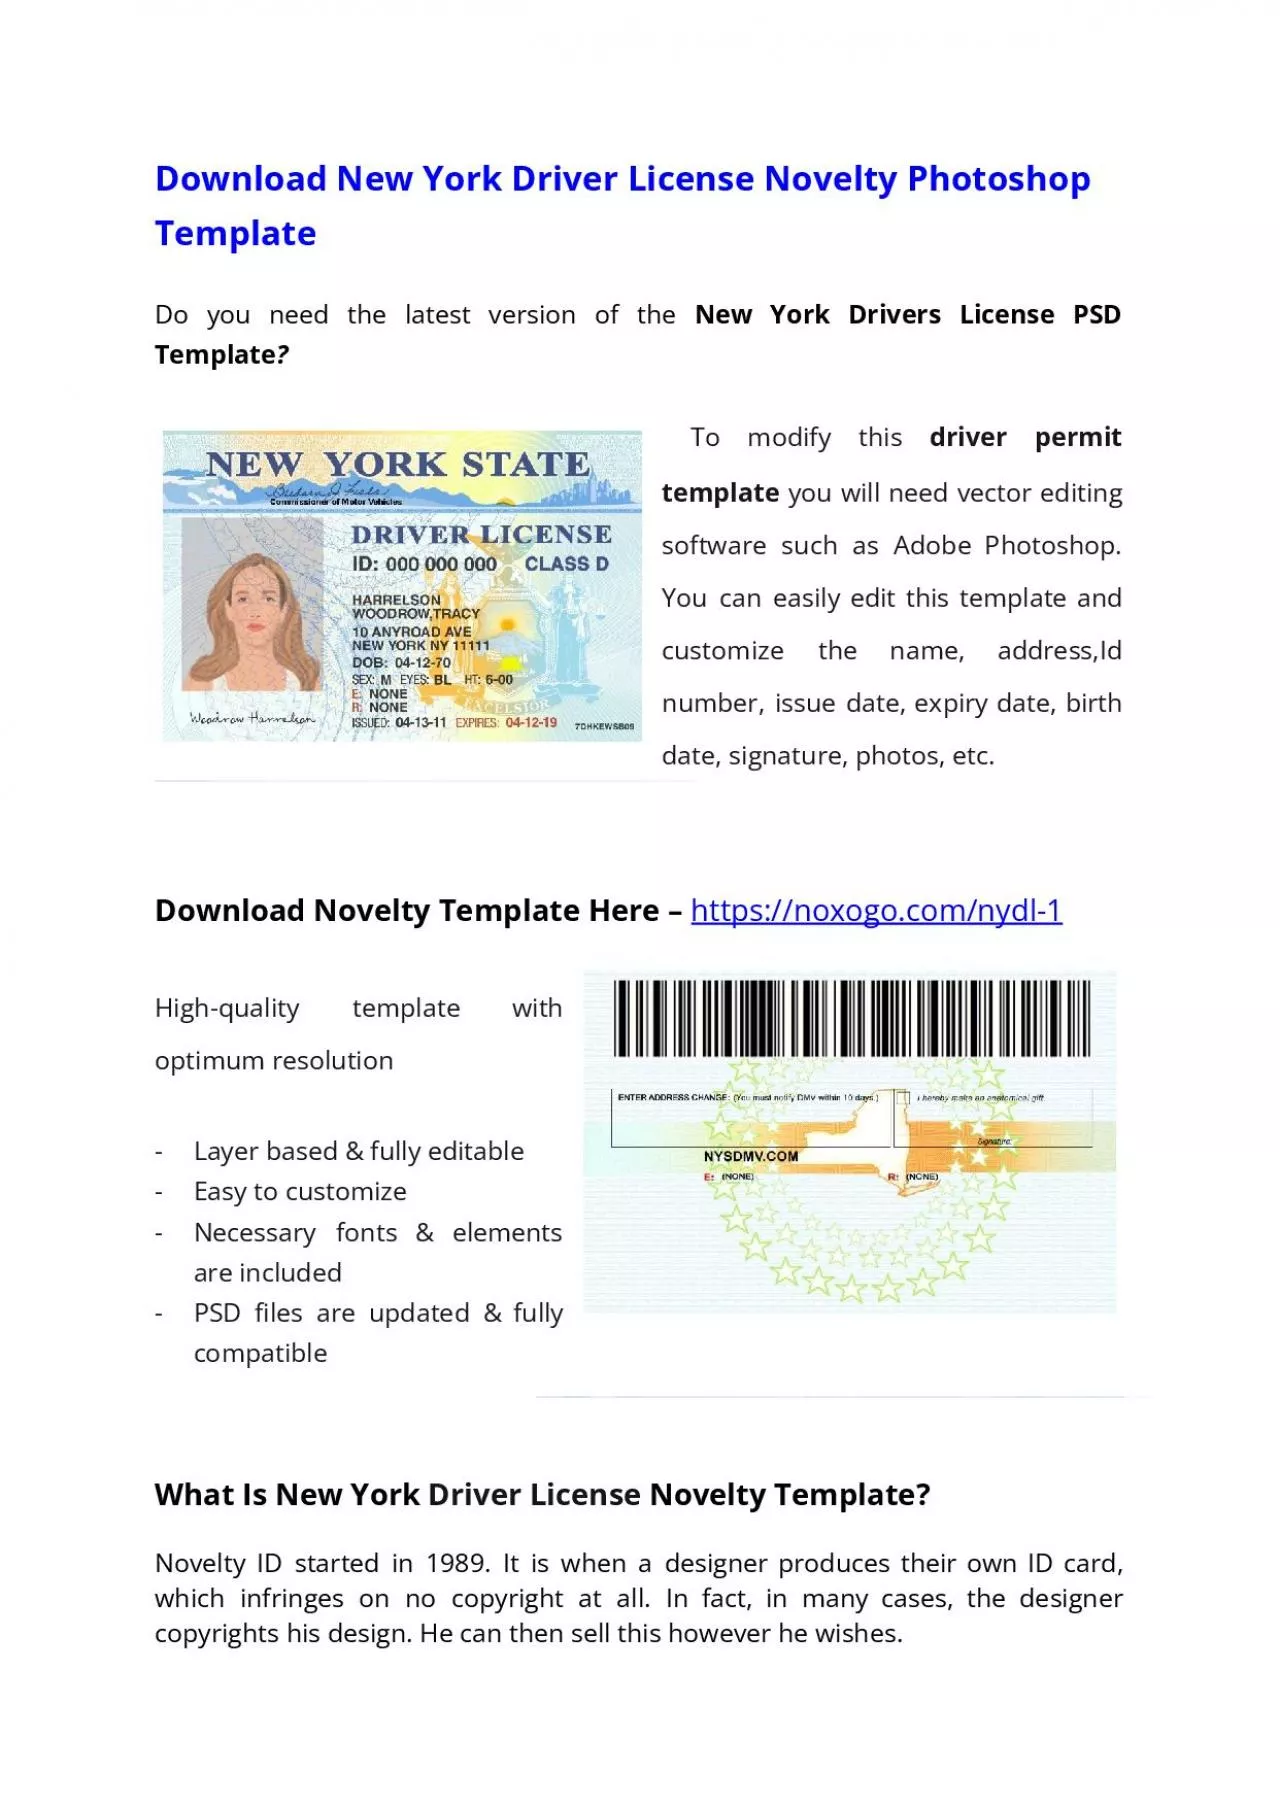 New York Drivers License PSD Template (V2) – Download Photoshop File